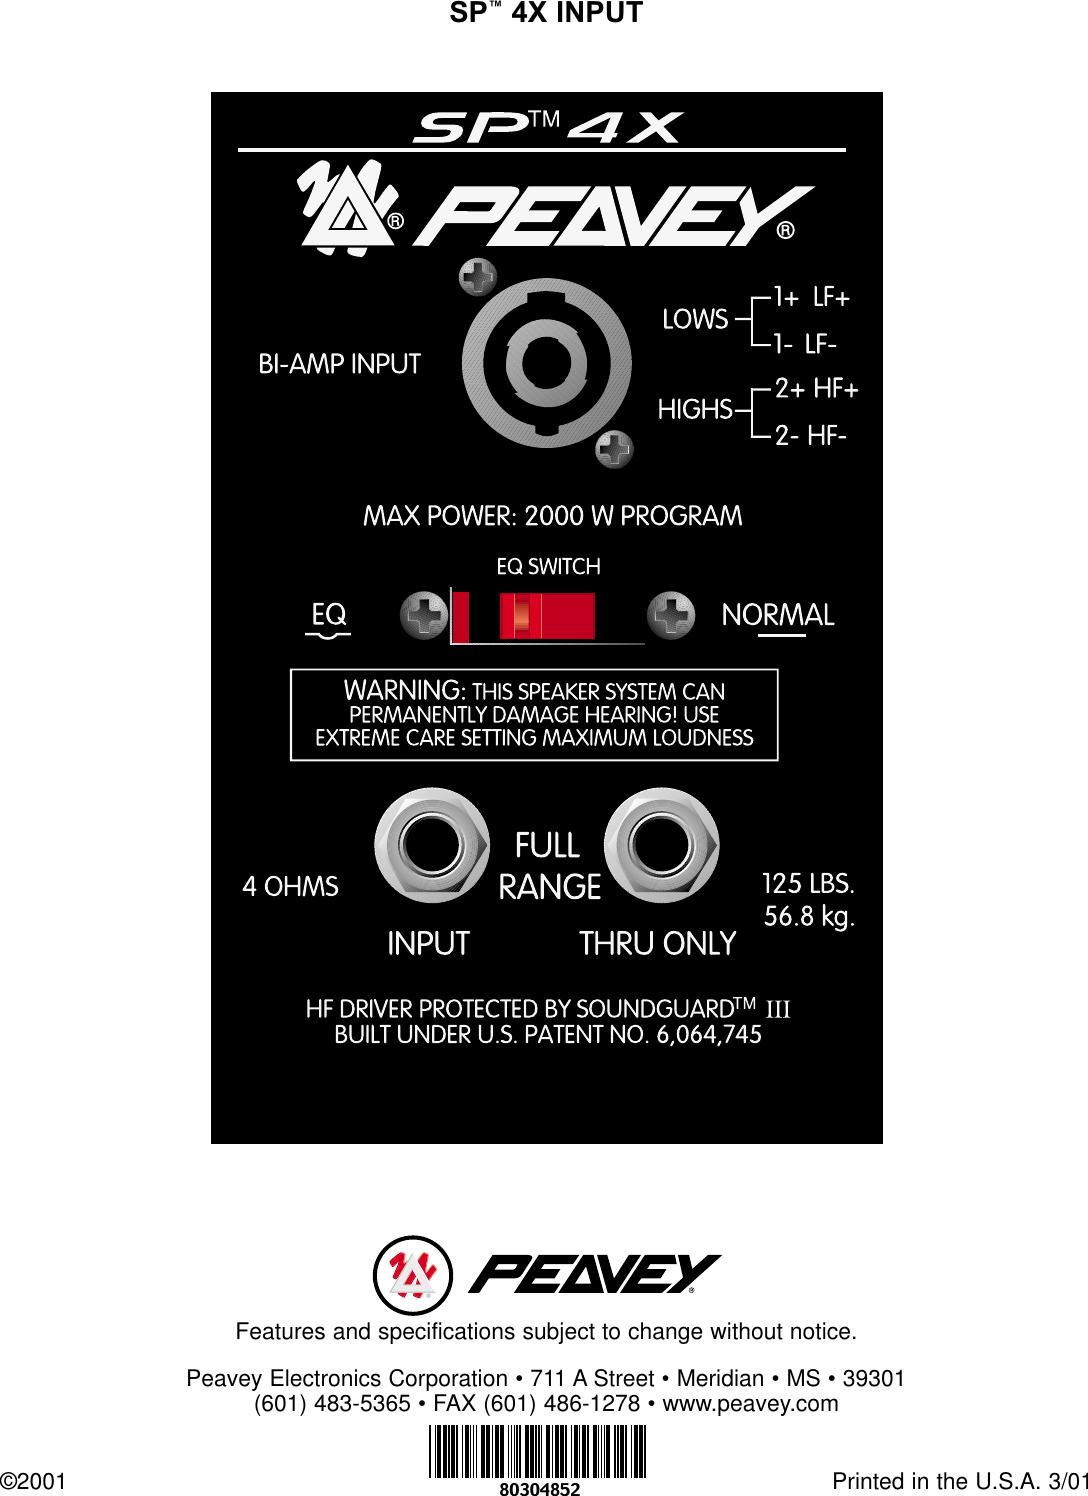 Page 4 of 4 - Peavey Peavey-Sp-4X-Users-Manual-  Peavey-sp-4x-users-manual